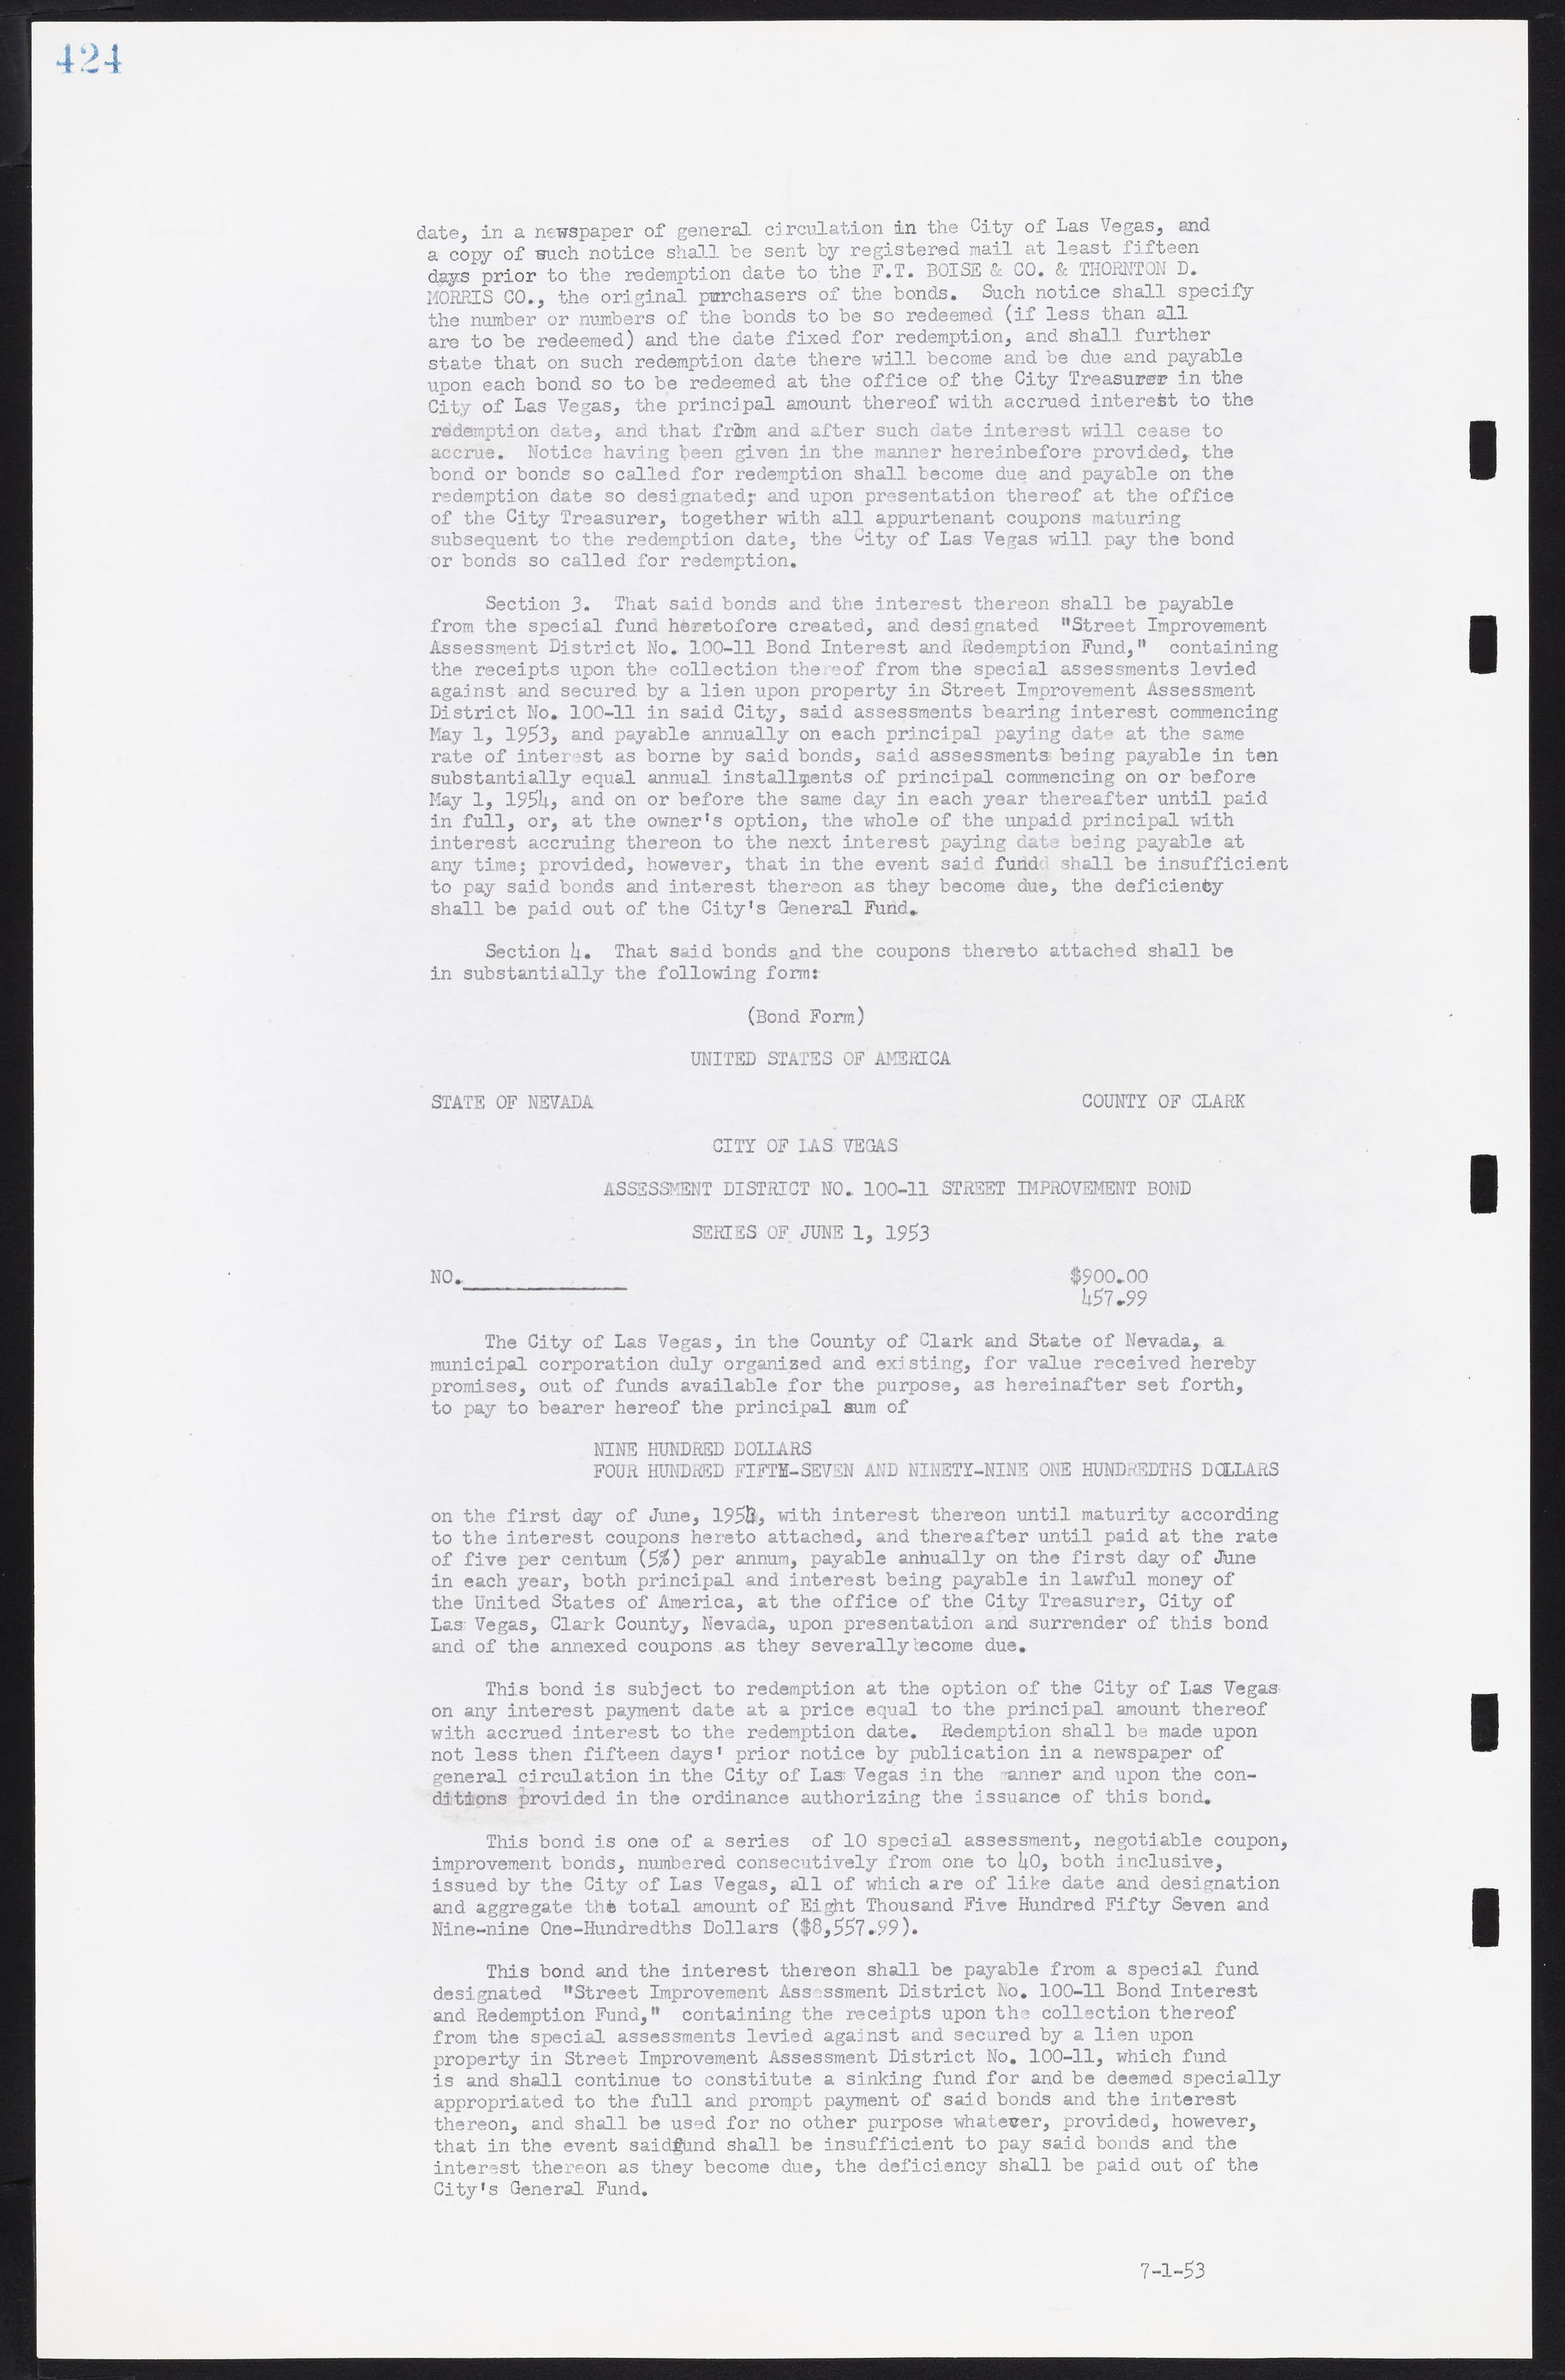 Las Vegas City Commission Minutes, May 26, 1952 to February 17, 1954, lvc000008-454